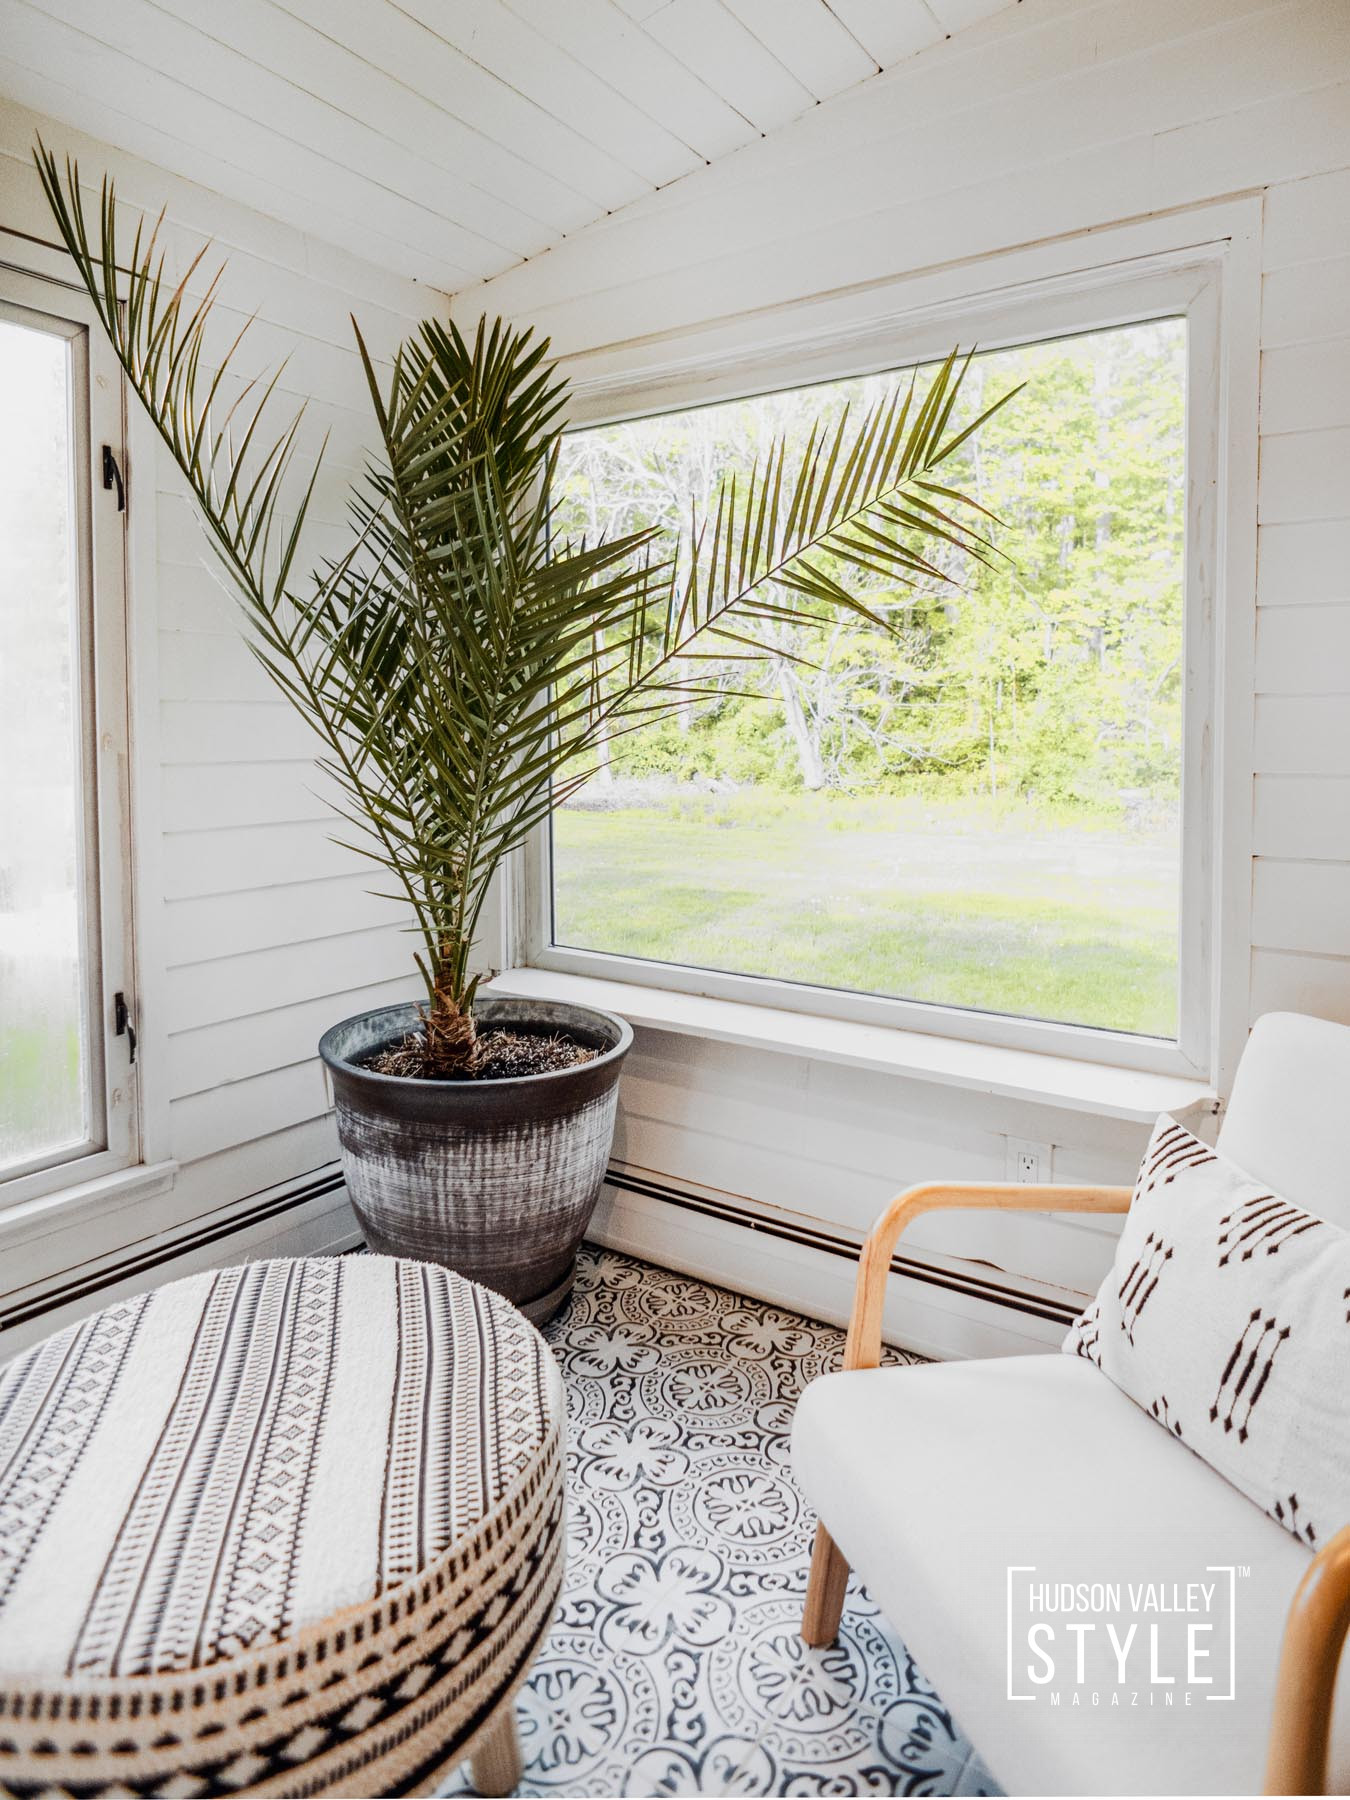 Discover Hudson Valley and stay in the newly renovated Airbnb home in Staatsburg, NY – Photography by Maxwell Alexander / ALLUVION MEDIA – Vacation Rental Management – Upstate NY Airbnb Photographer